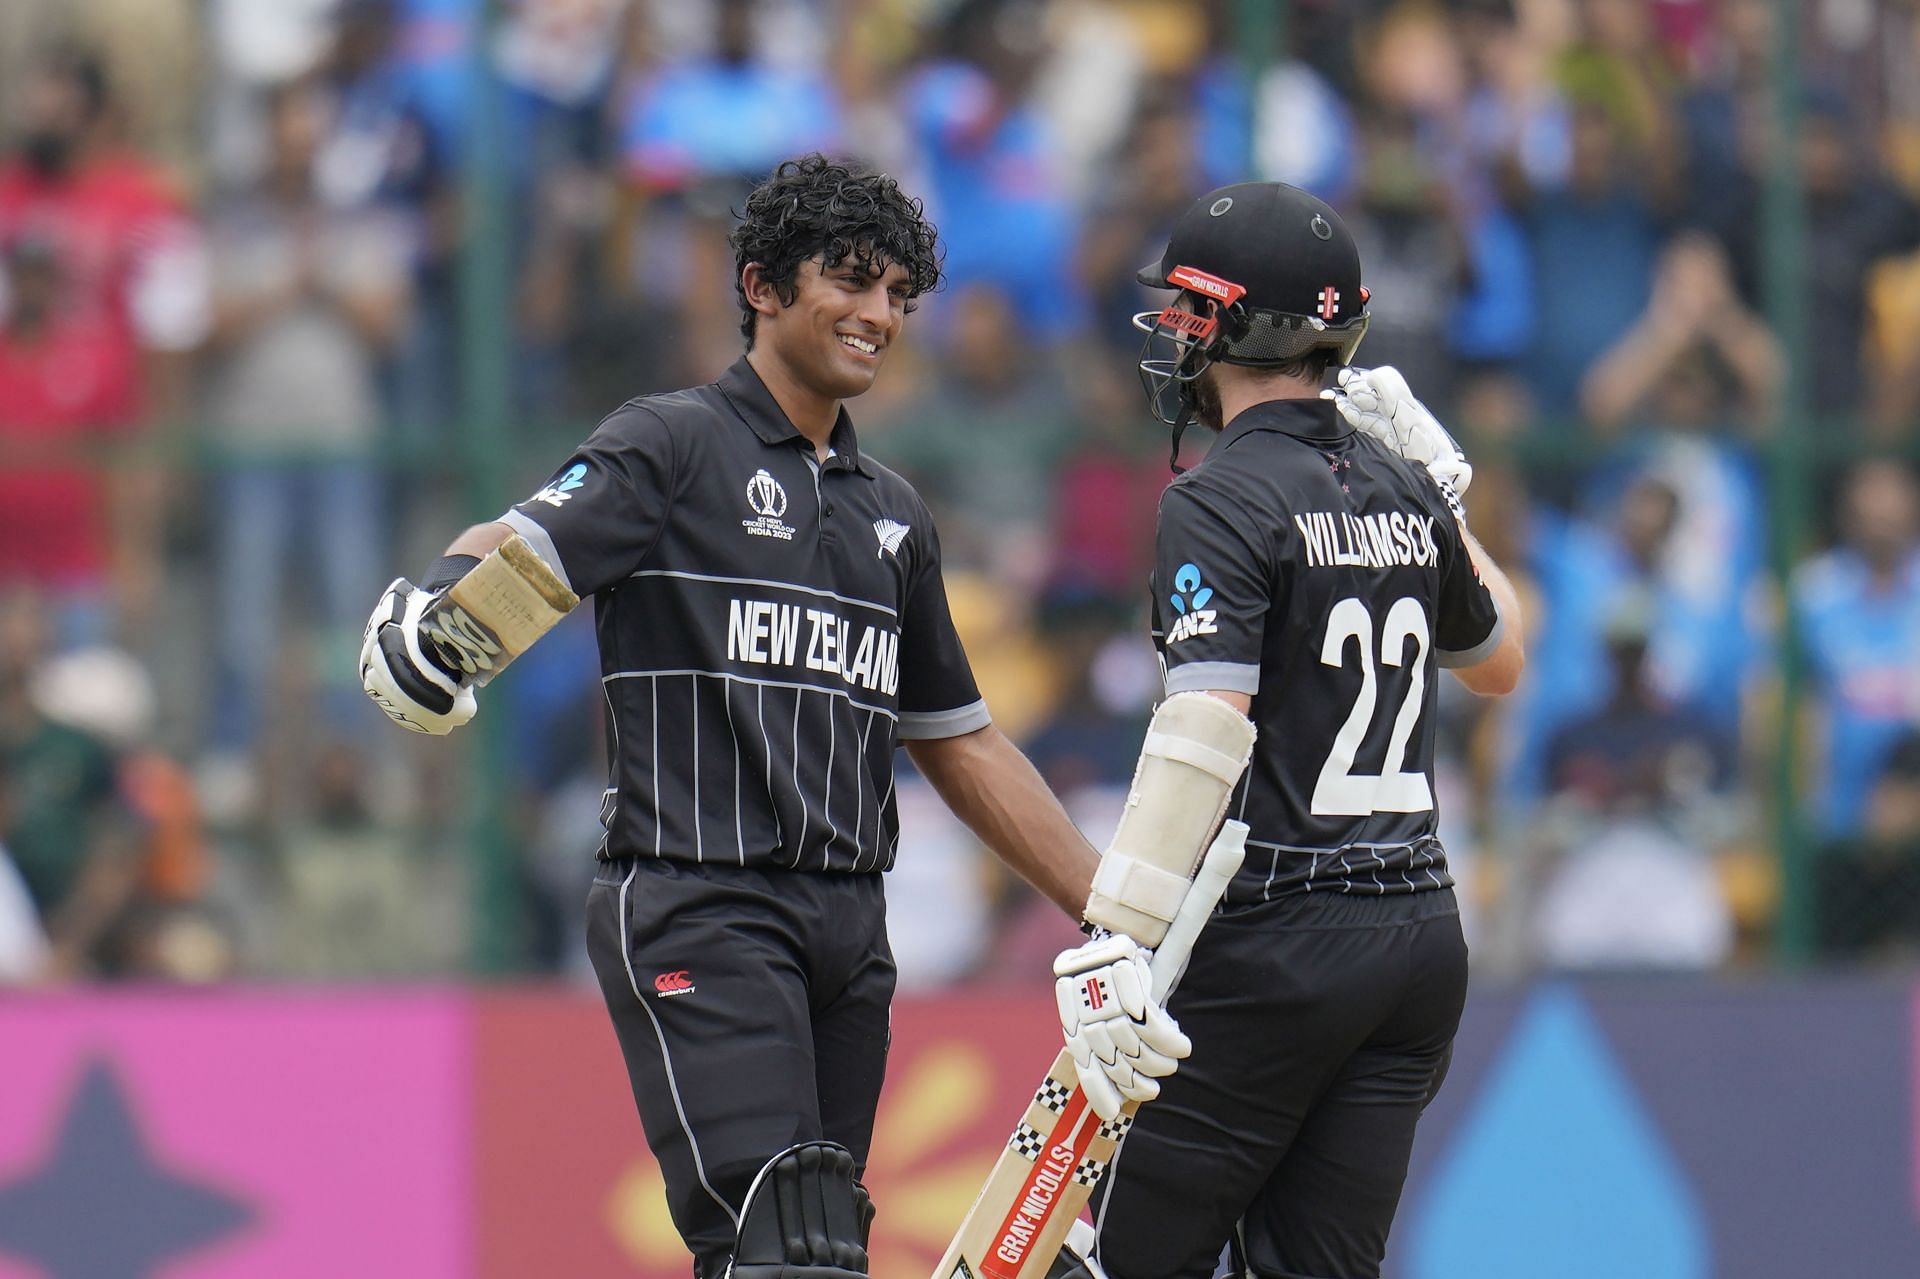 The New Zealand batters took the Pakistan bowling to the cleaners. [P/C: AP]